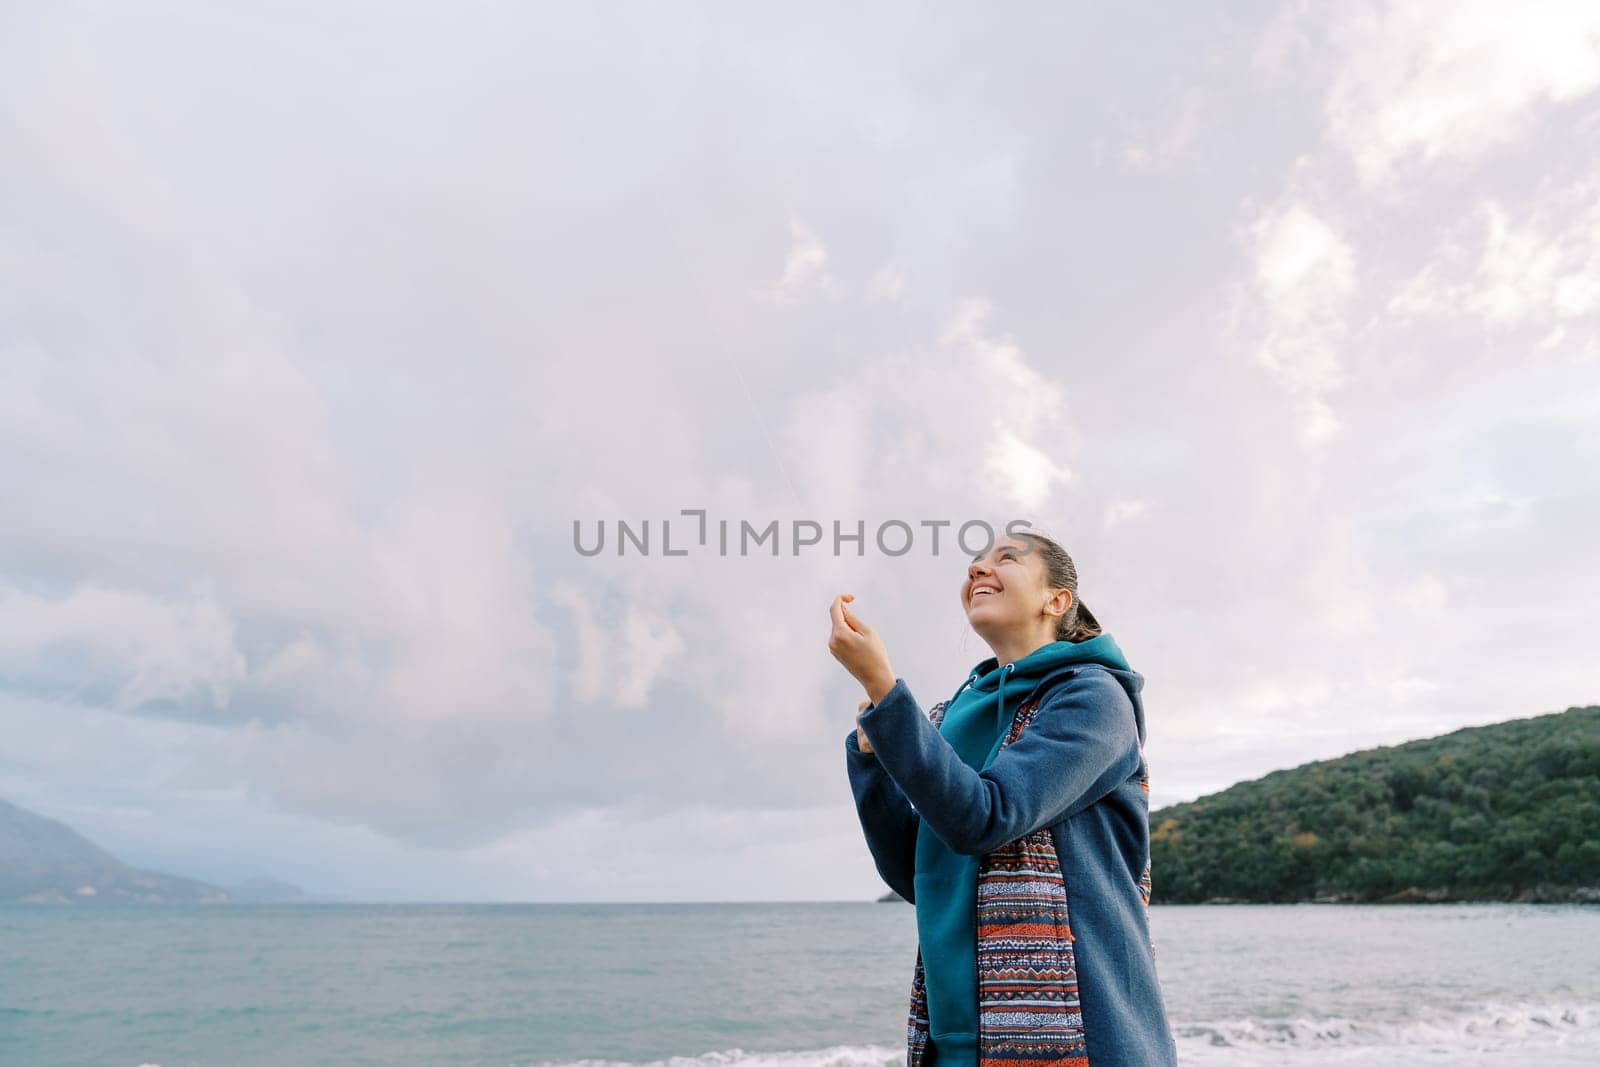 Young woman is standing by the sea with a kite spool in her hands, straightening the thread, and looking up. High quality photo